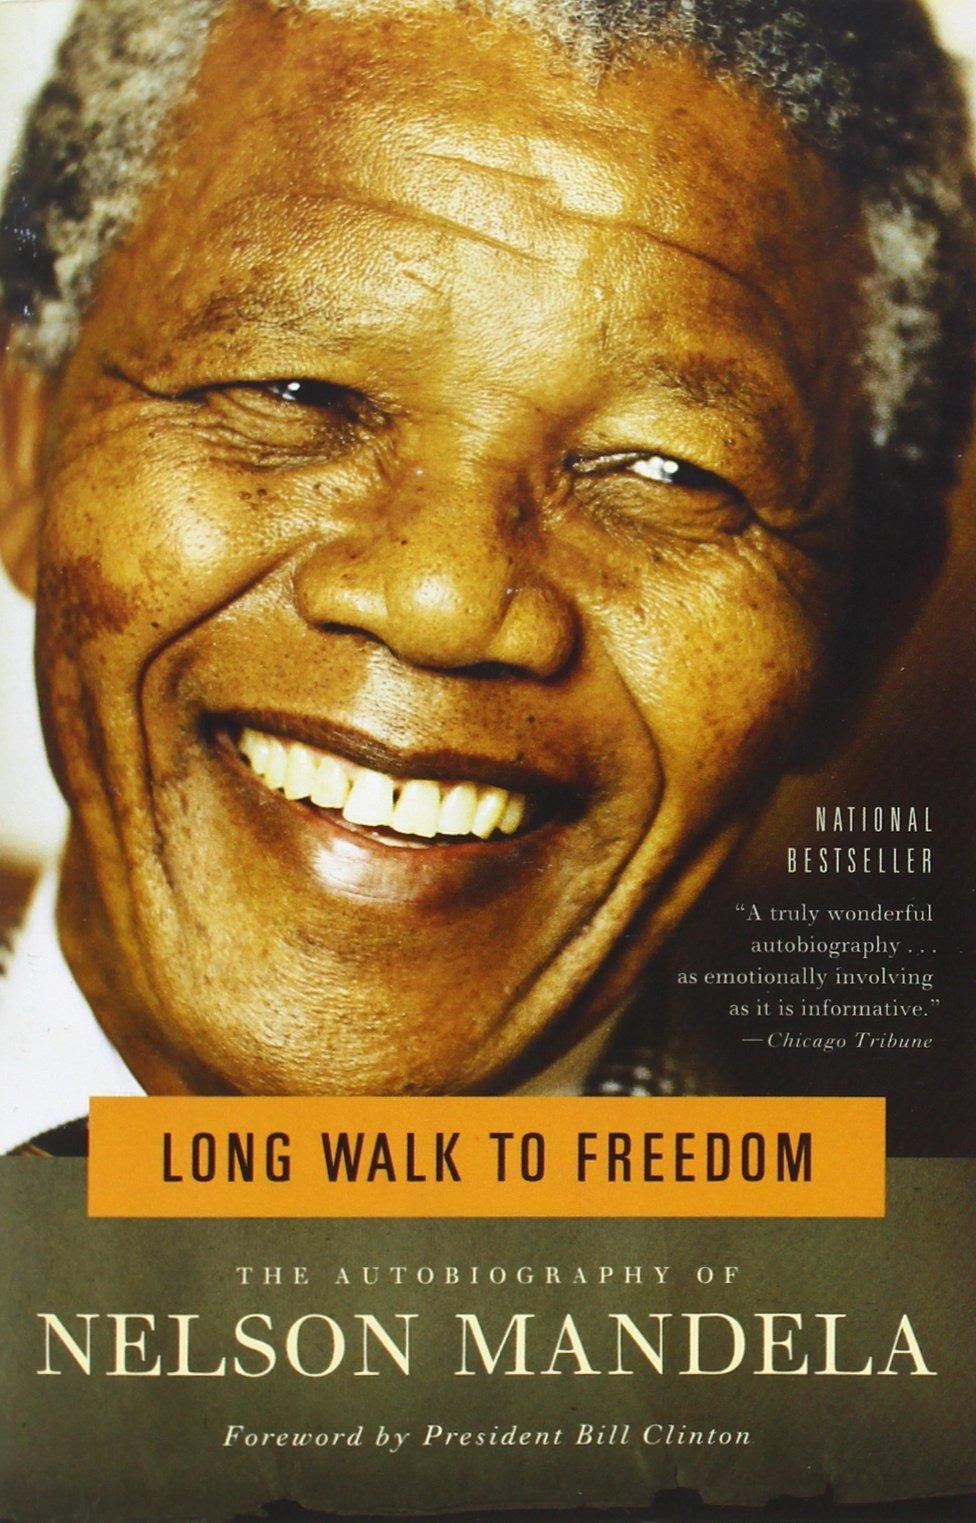 Book 'Long Walk to Freedom'